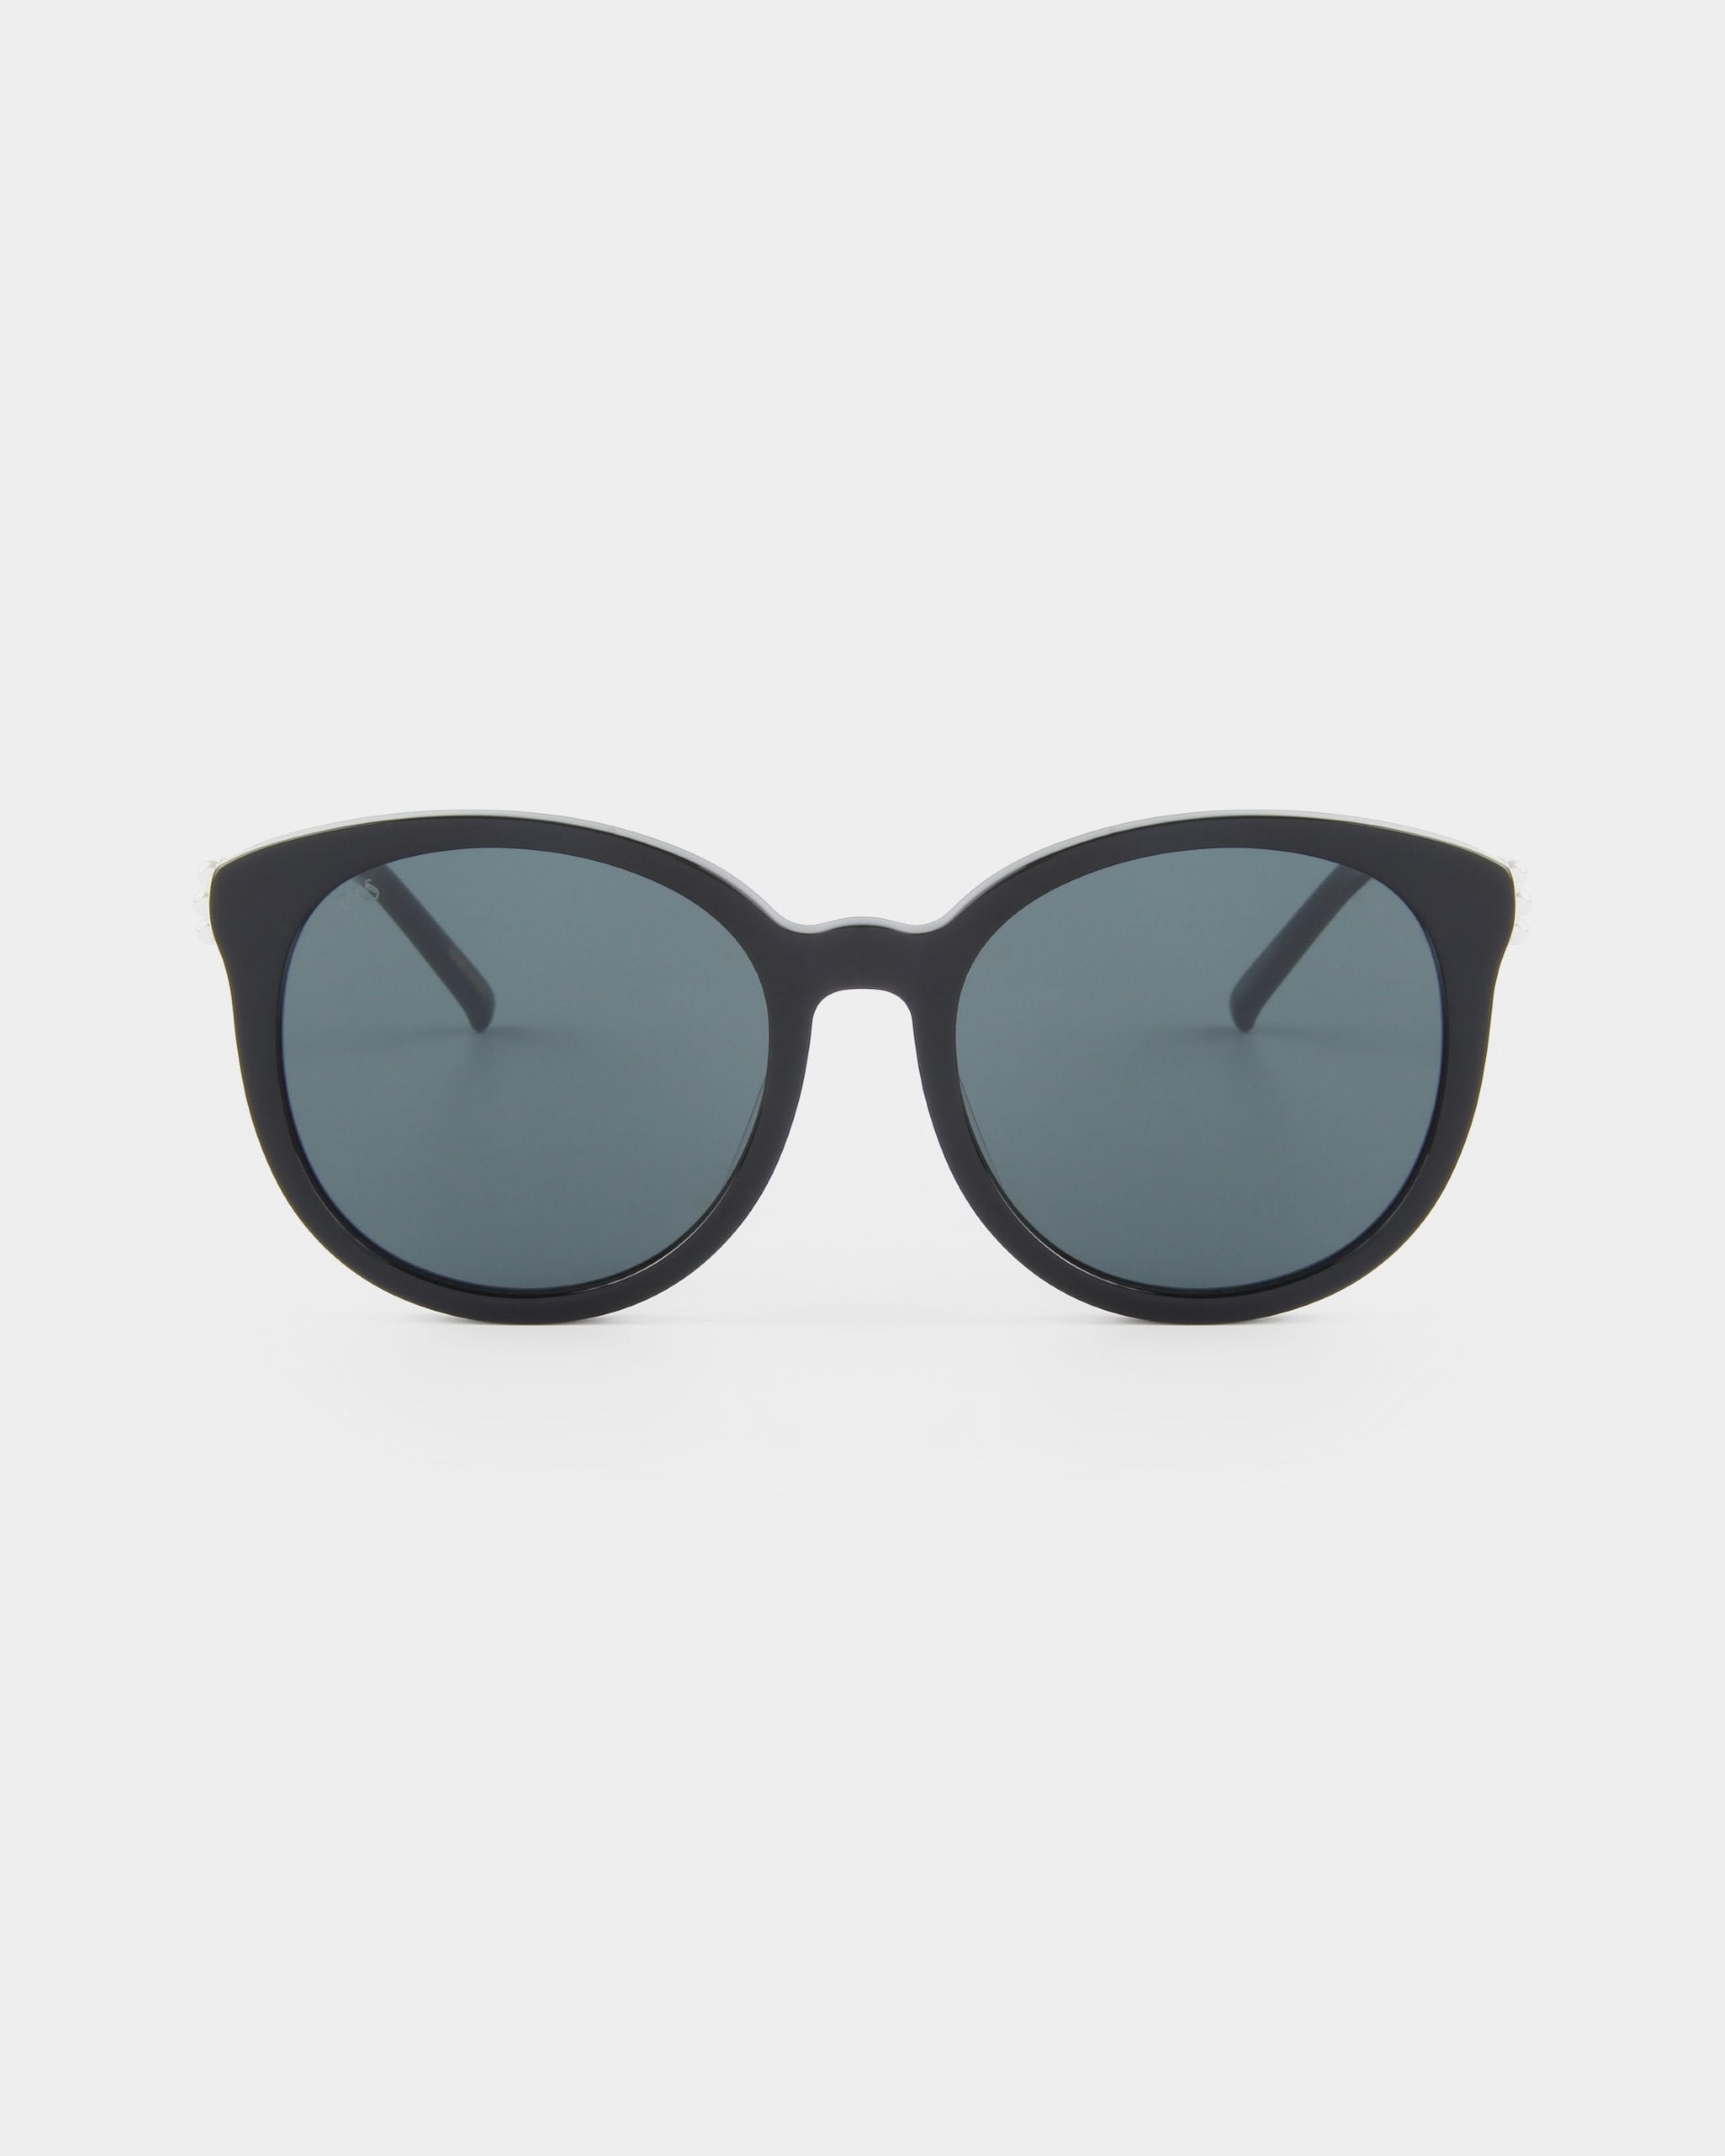 A pair of black Scarlett frames, round-frame sunglasses with shatter-resistant nylon lenses that offer UVA &amp; UVB protection are viewed from the front against a plain white background. These are Scarlett by For Art&#39;s Sake®.